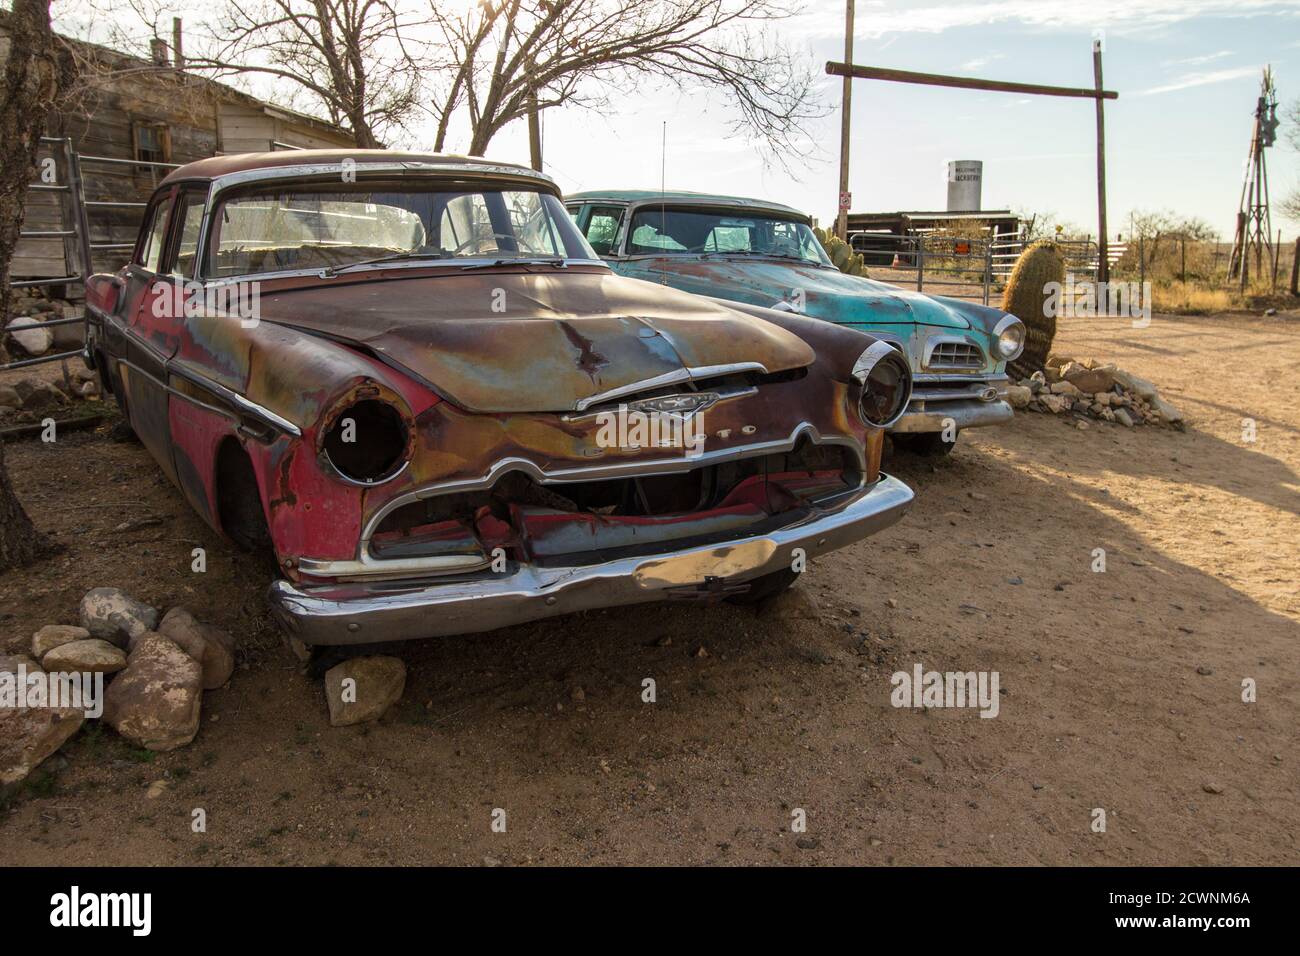 Hackberry, Arizona, USA - February 17, 2020: Two antique classic Chrysler Desoto automobiles in the remote desert of along Route 66 in Arizona. Stock Photo